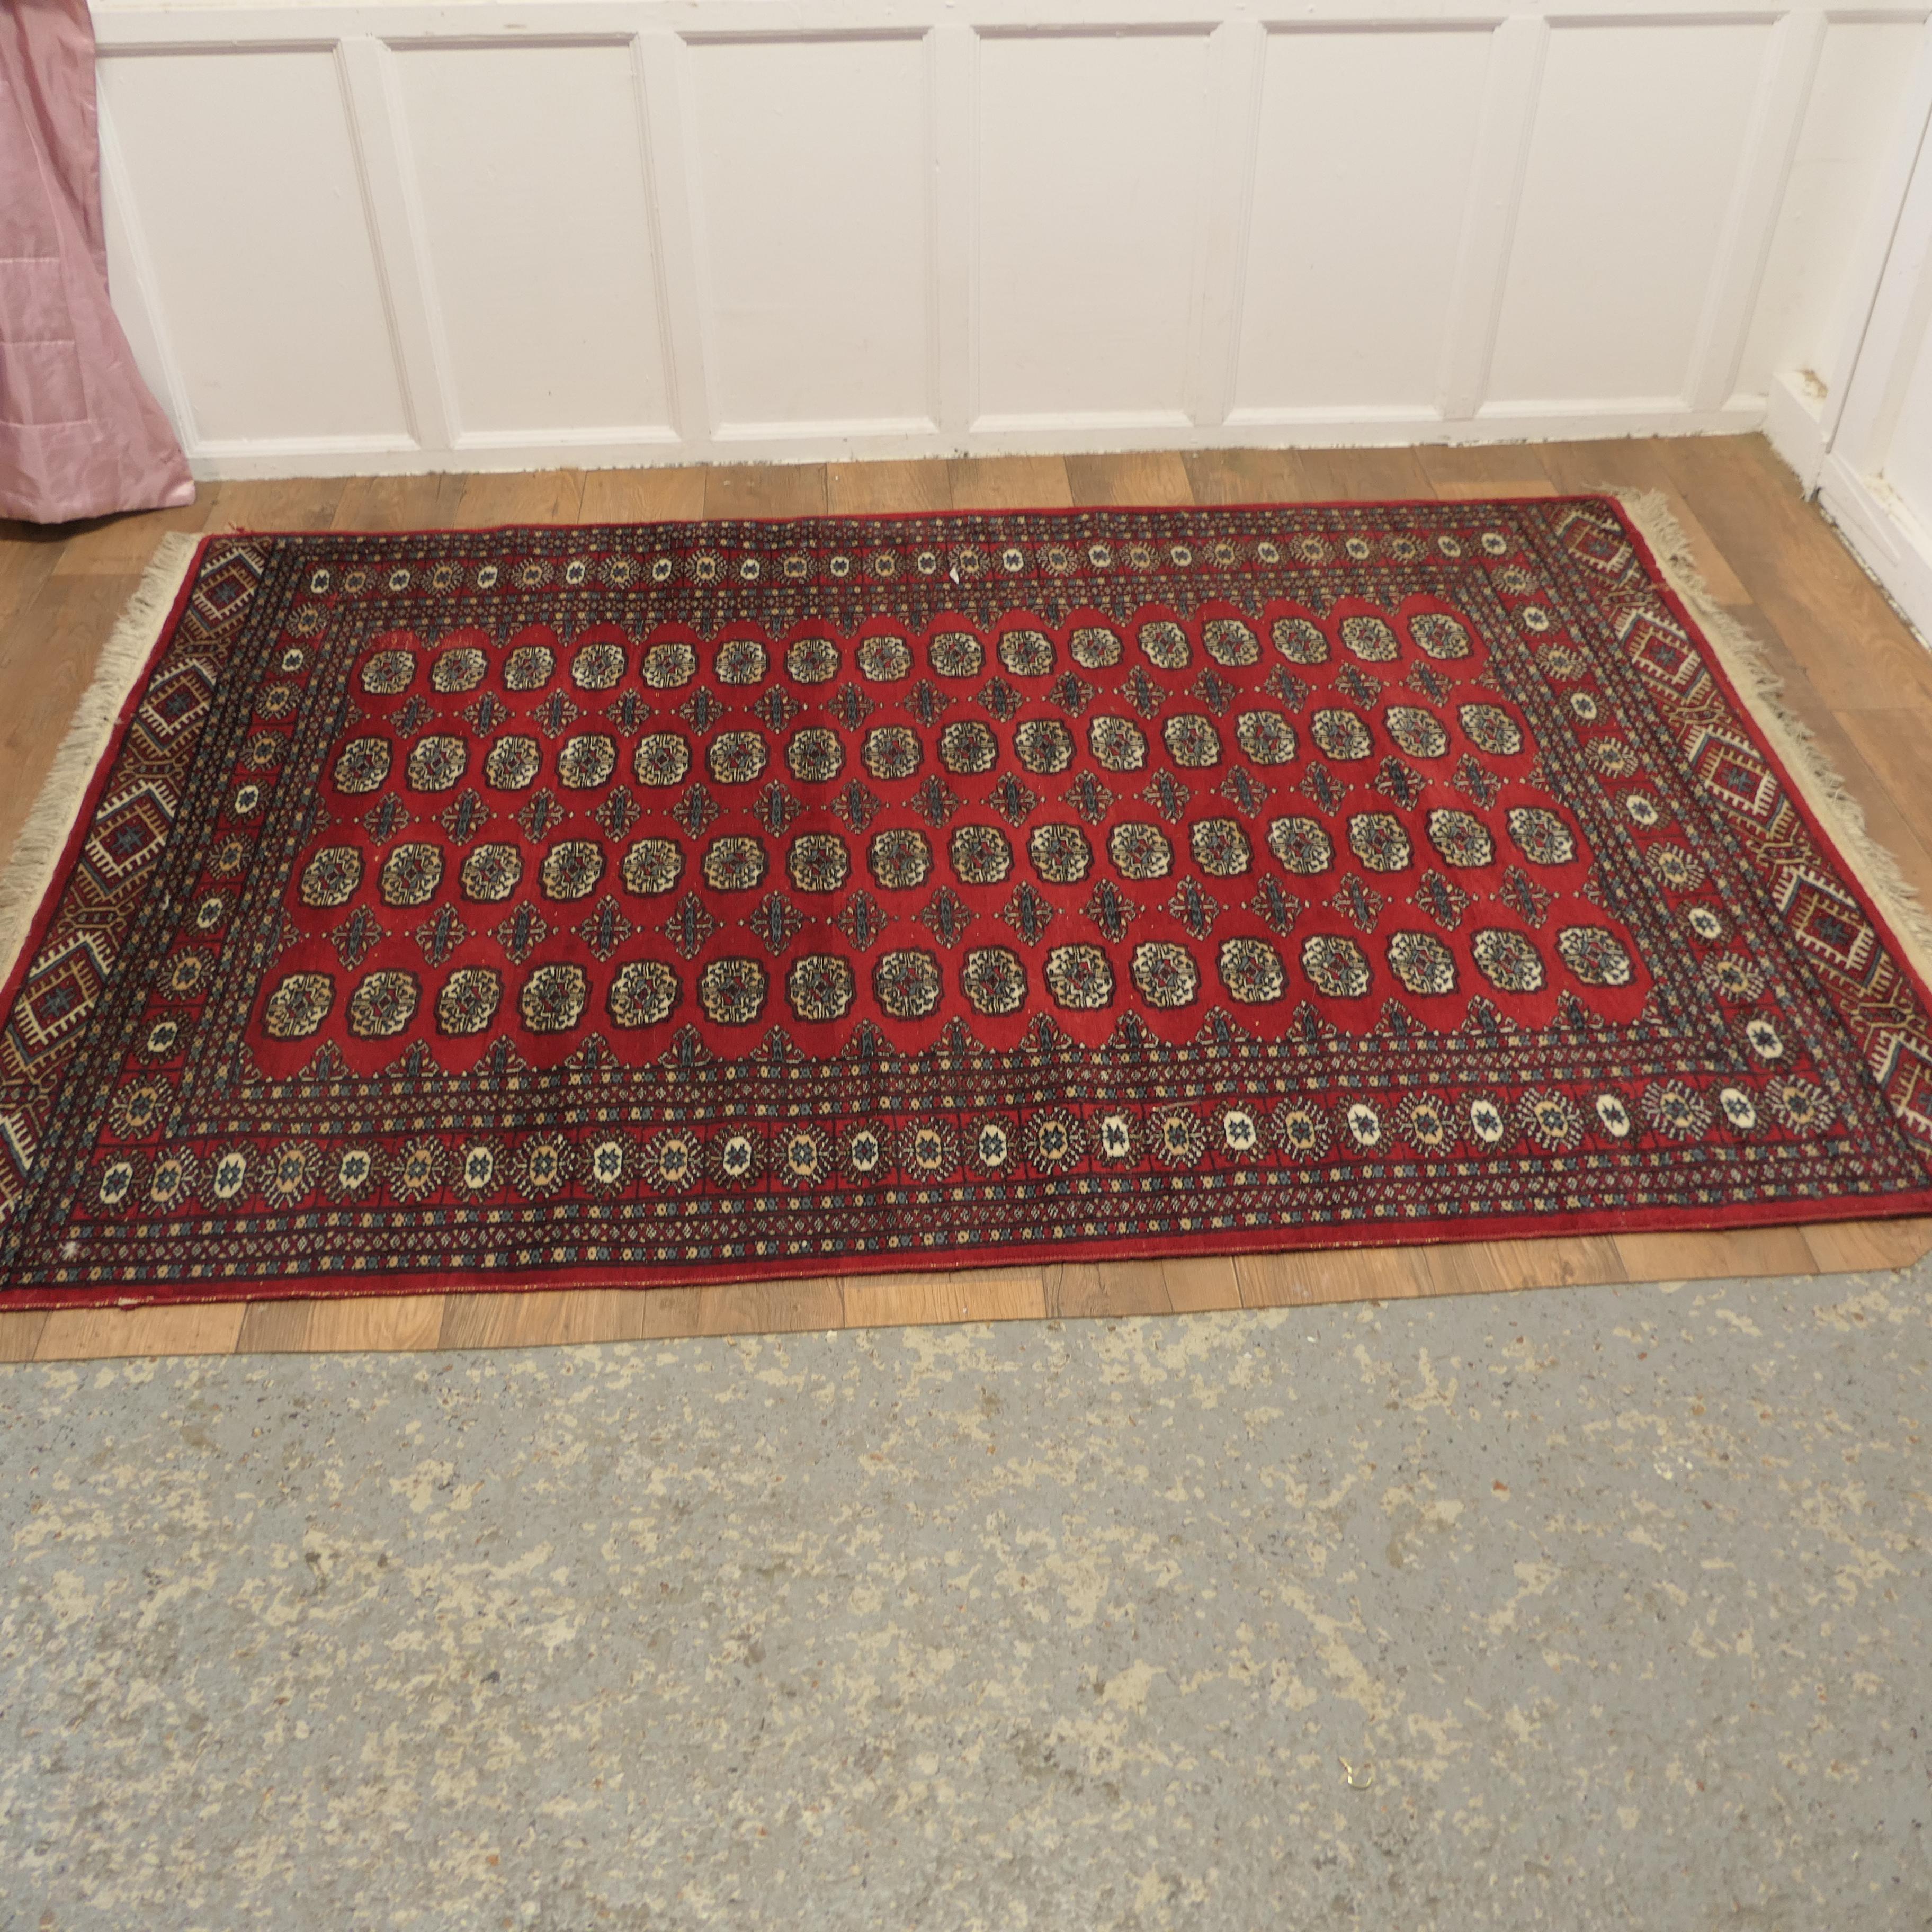 A Lovely Bright Red Wool Rug  The Carpet is a wonderful Bright colour   For Sale 4